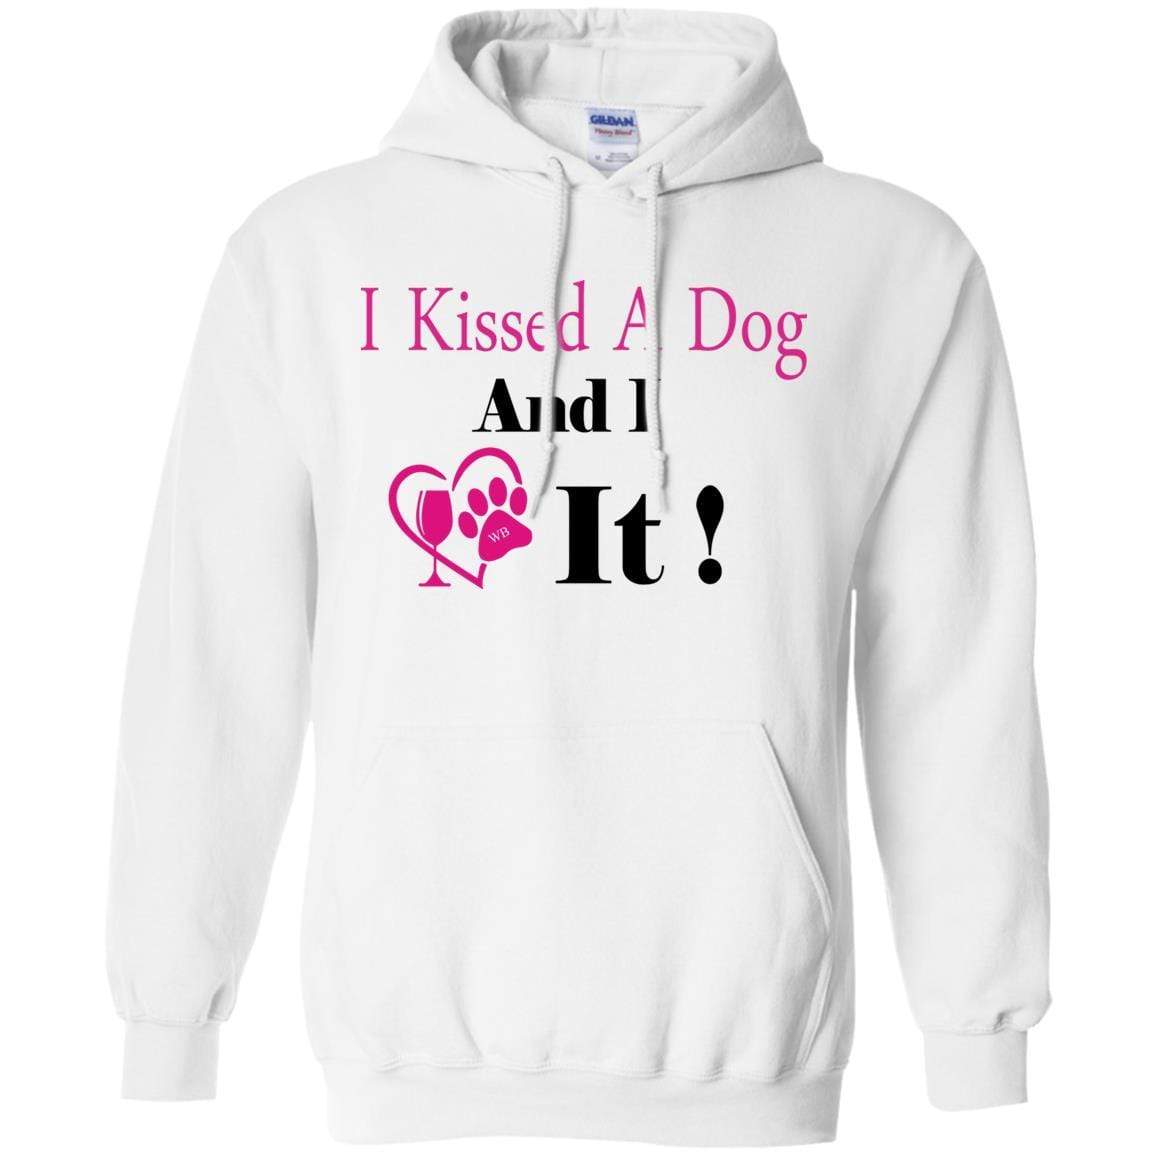 Sweatshirts White / S WineyBitches.co "I Kissed A Dog And I Loved It:"  Pullover Unisex Hoodie 8 oz. WineyBitchesCo